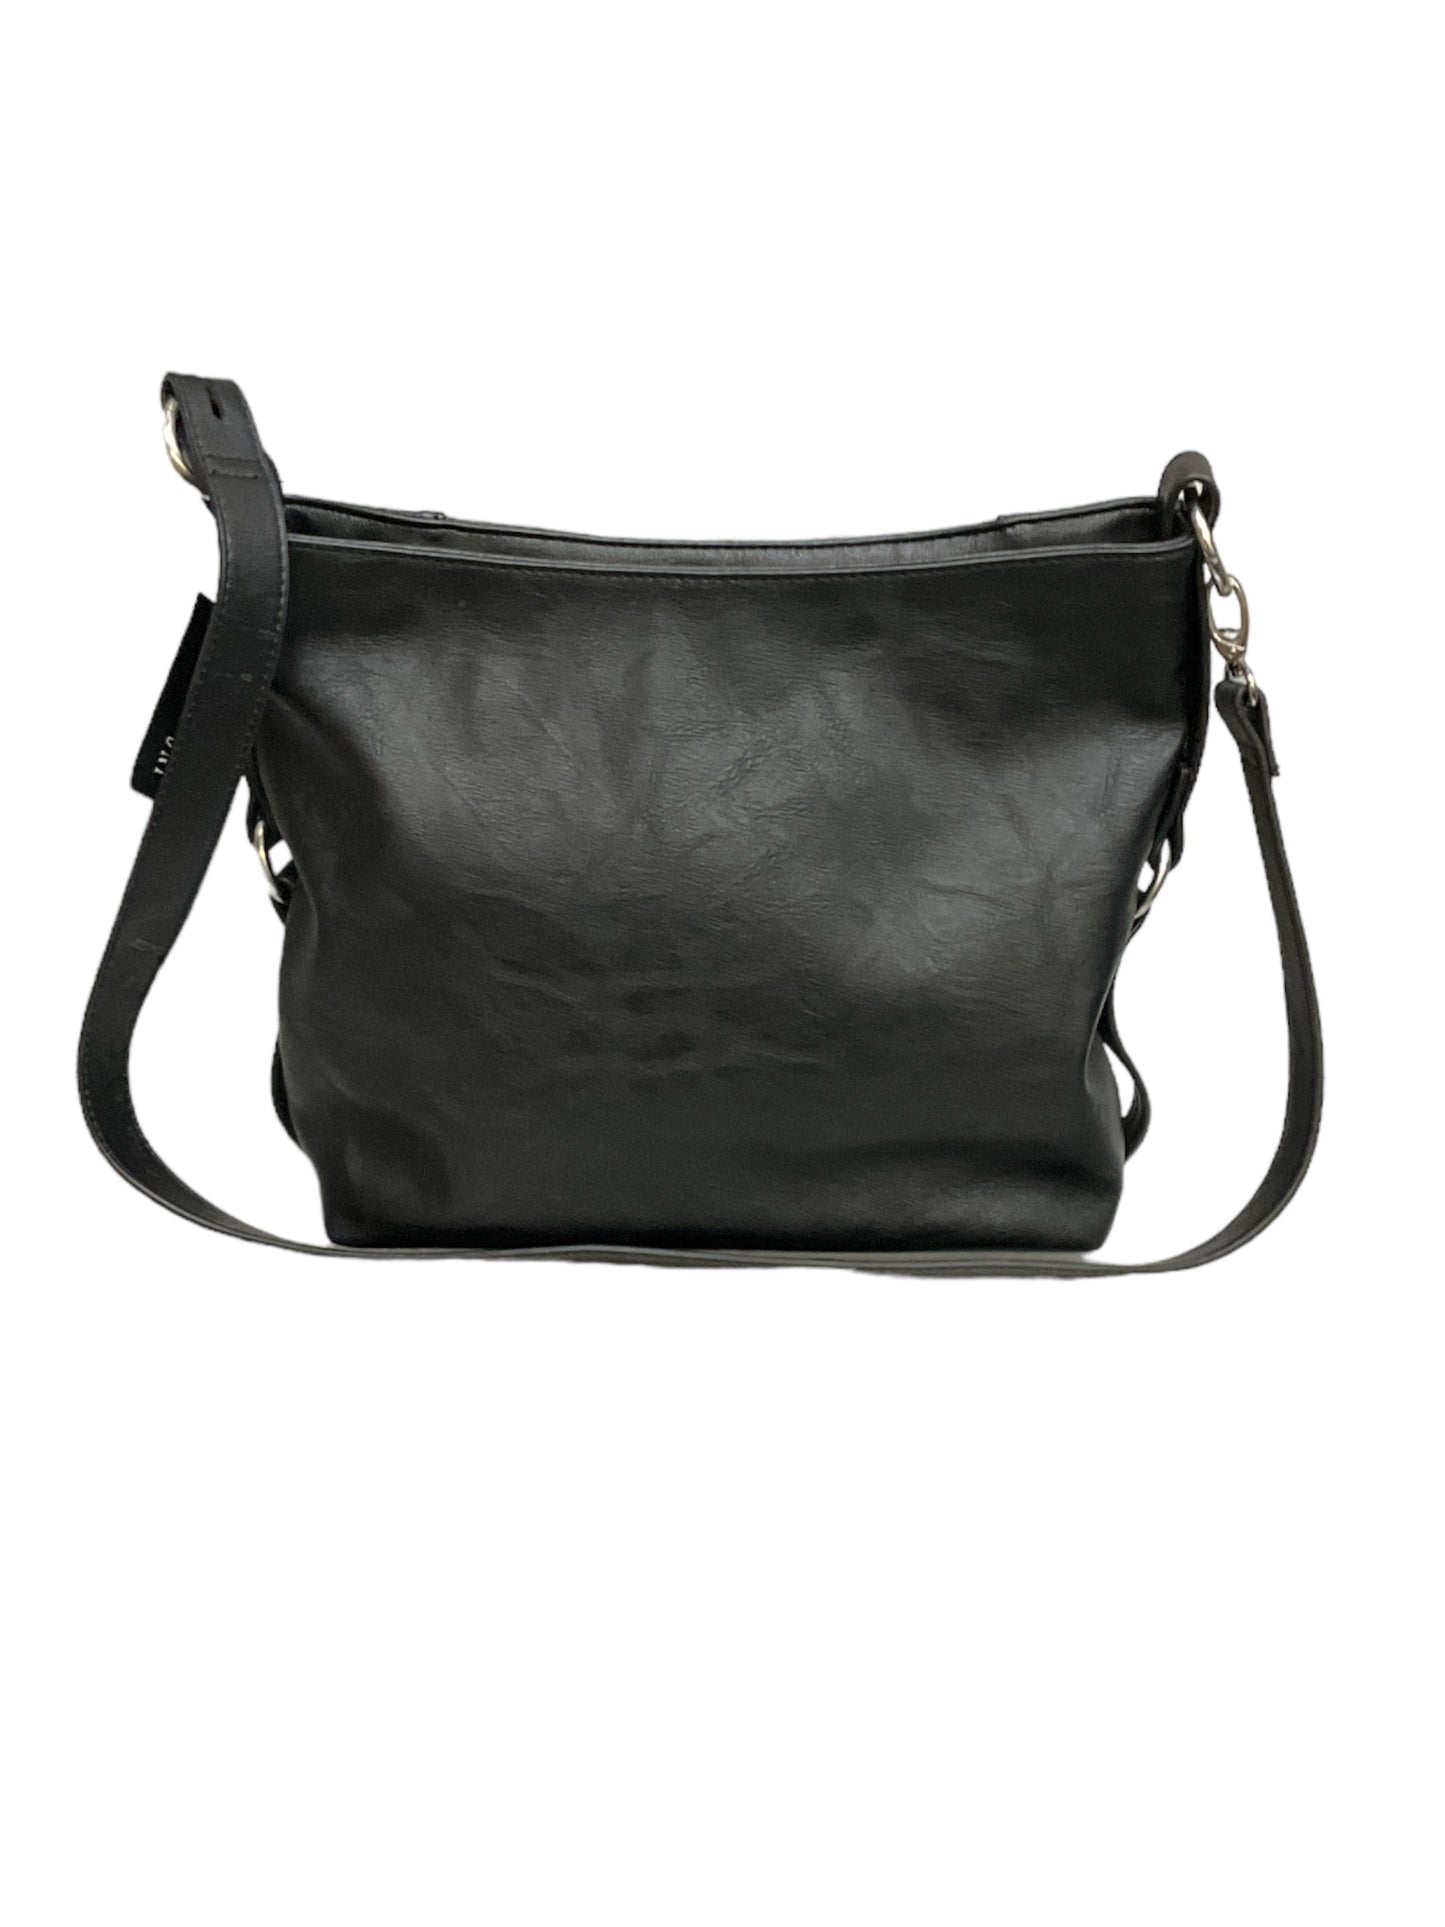 Crossbody By Clothes Mentor  Size: Large